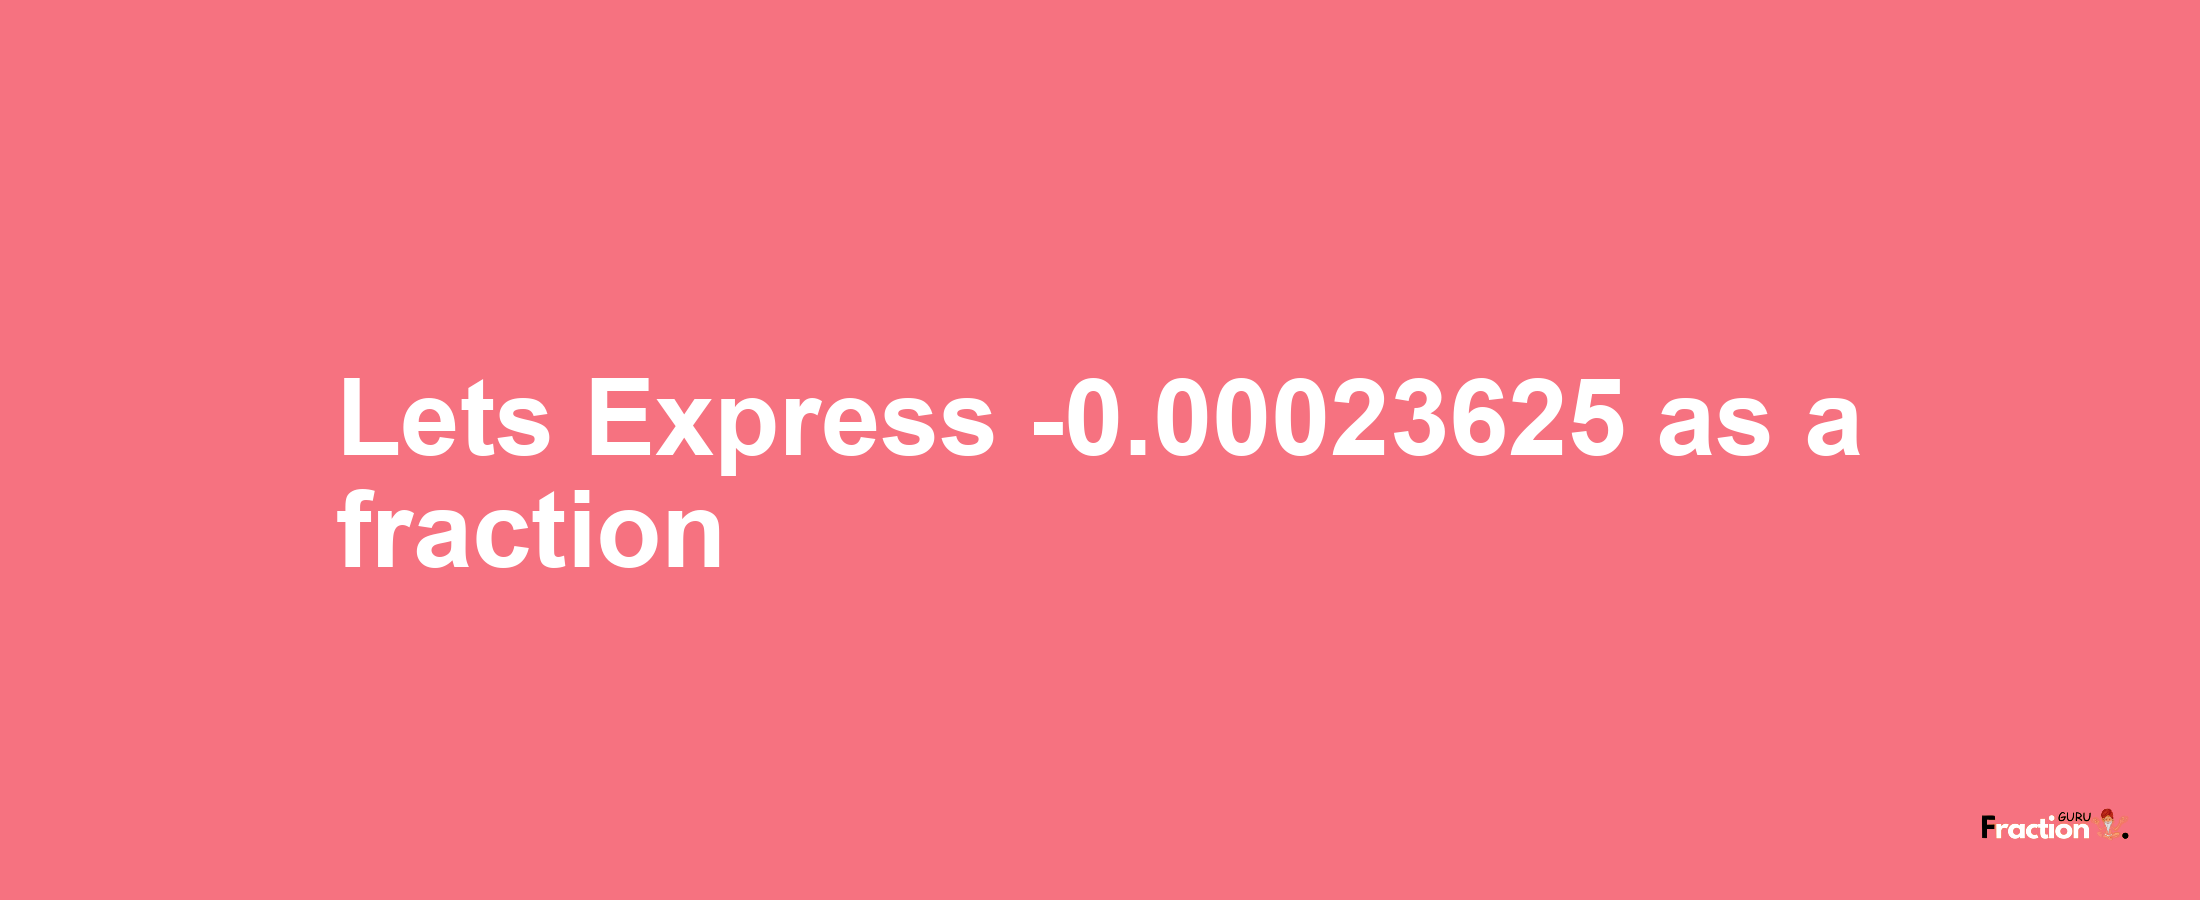 Lets Express -0.00023625 as afraction